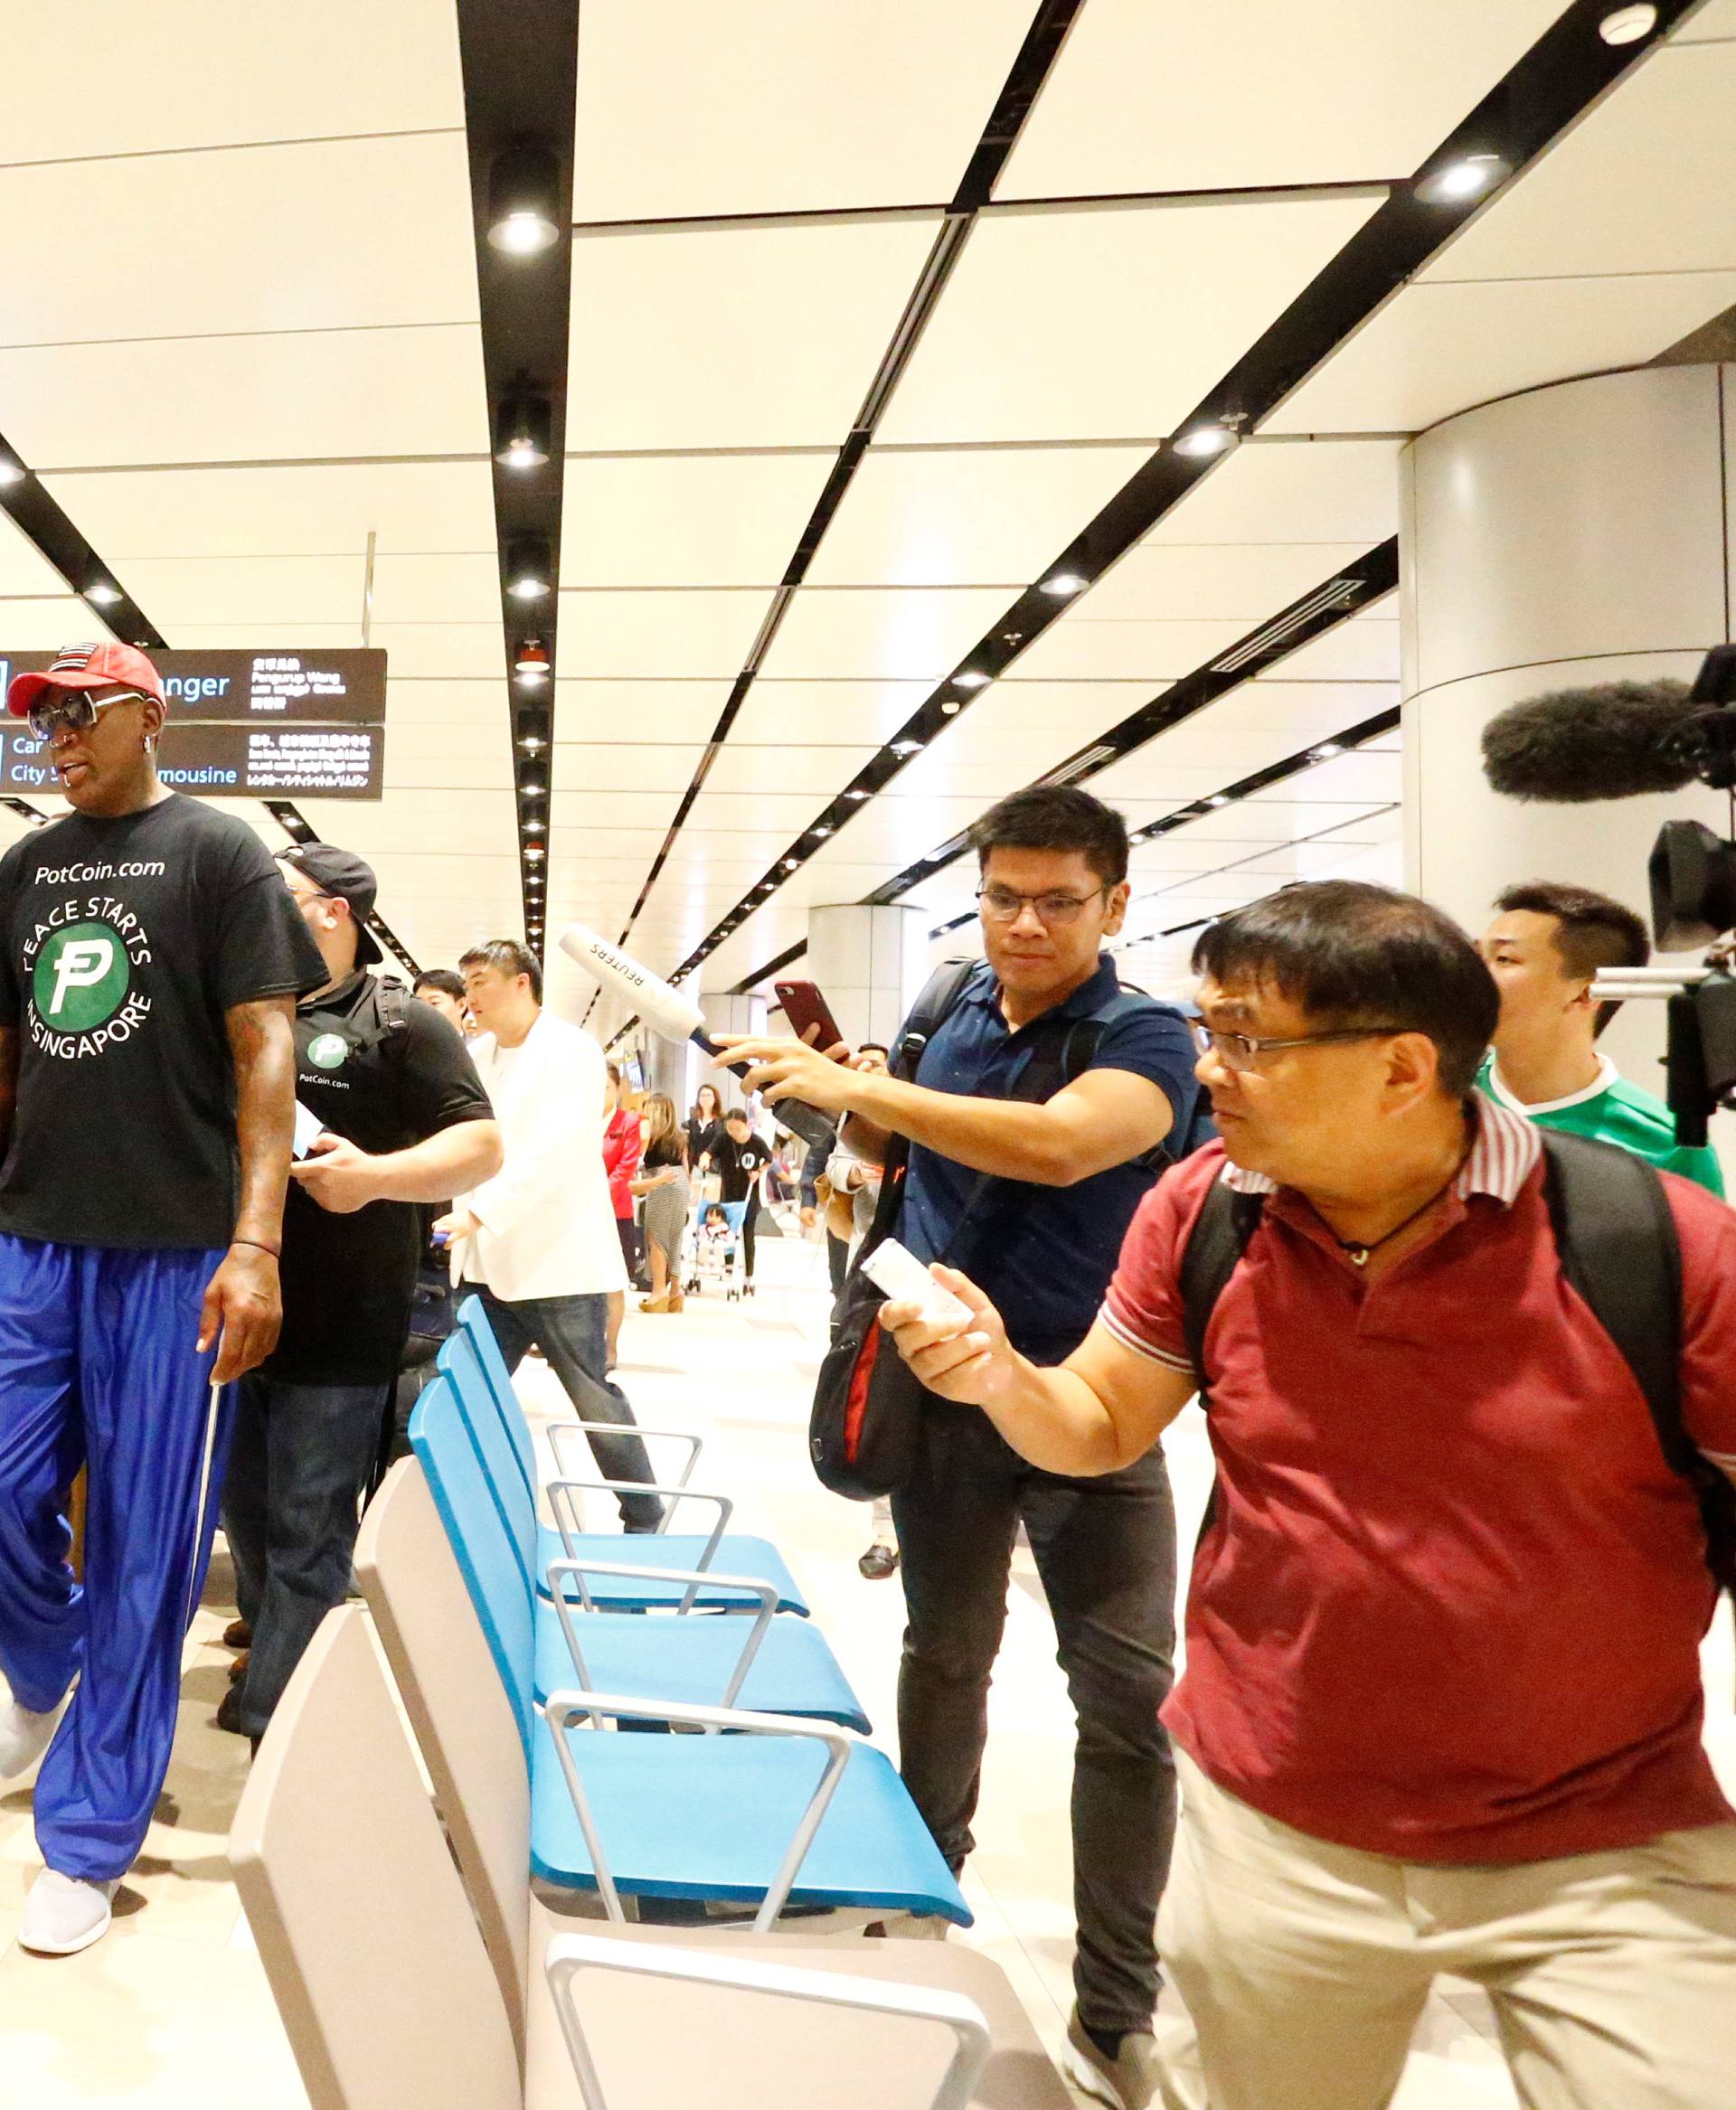 Former basketball player Dennis Rodman arrives at Changi Airport in Singapore